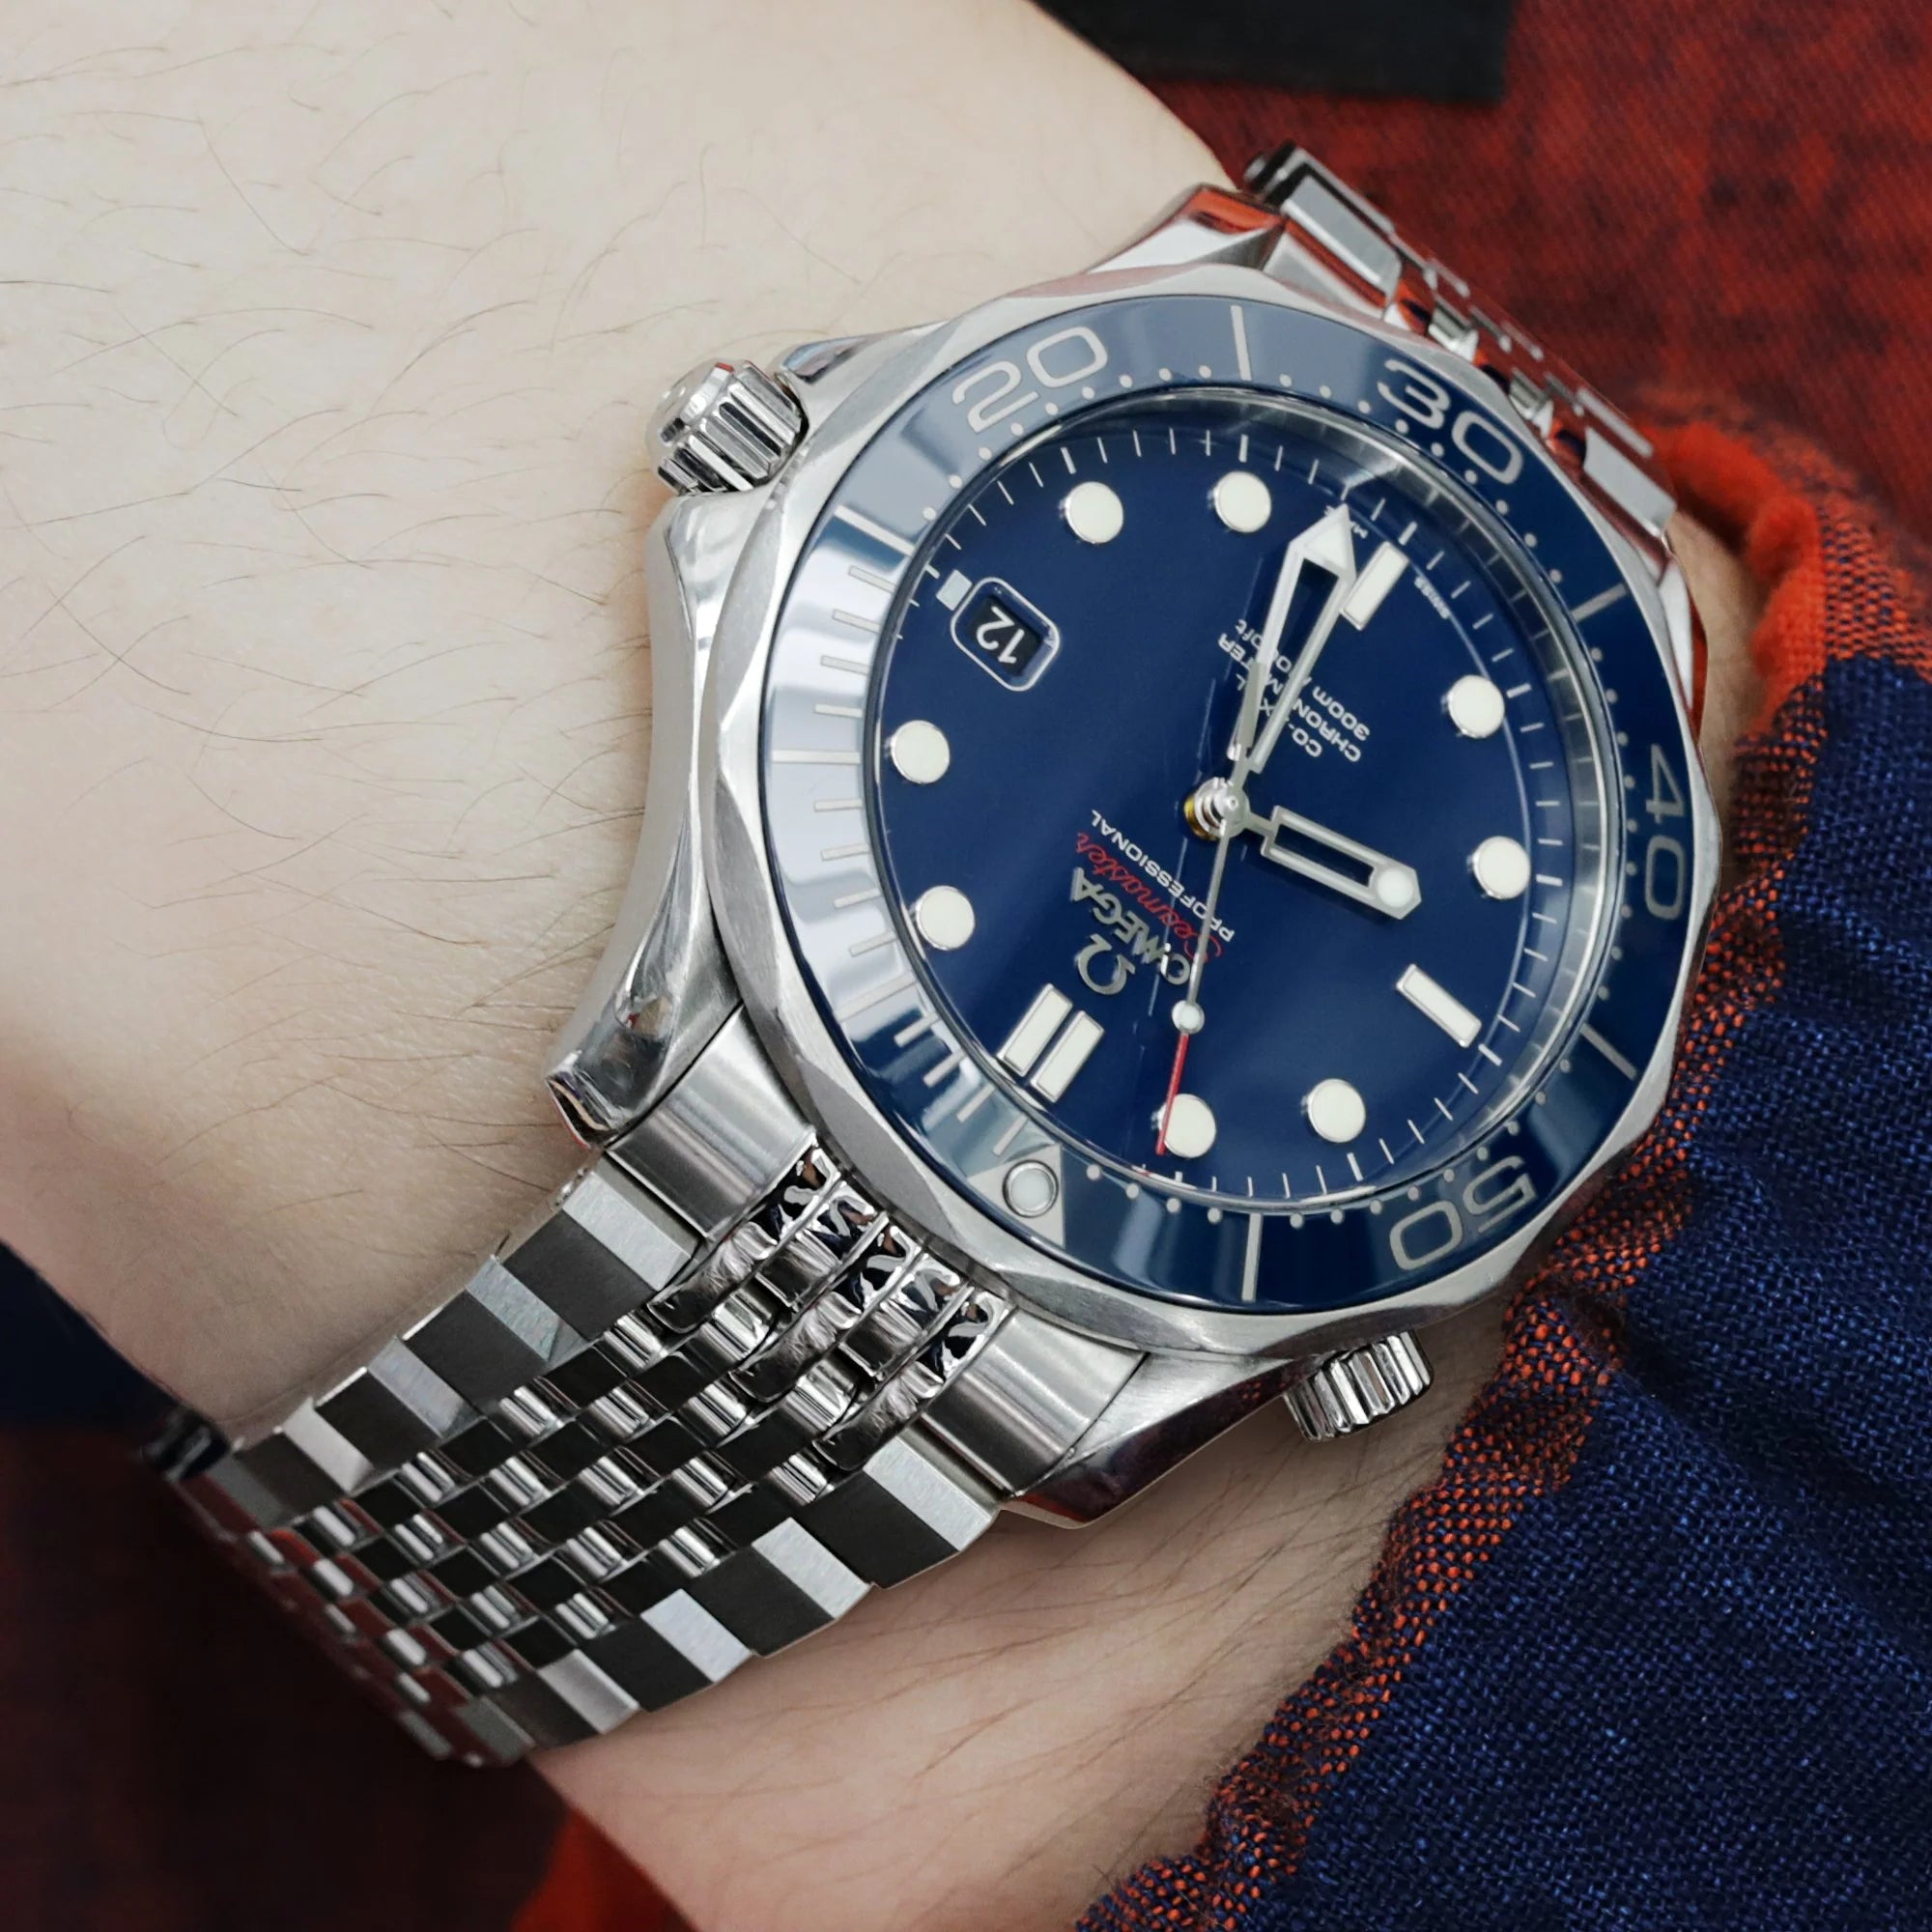 [STRAPCODE] Asteroid Bracelet for Omega Seamaster 41mm / Moonswatch [20mm]